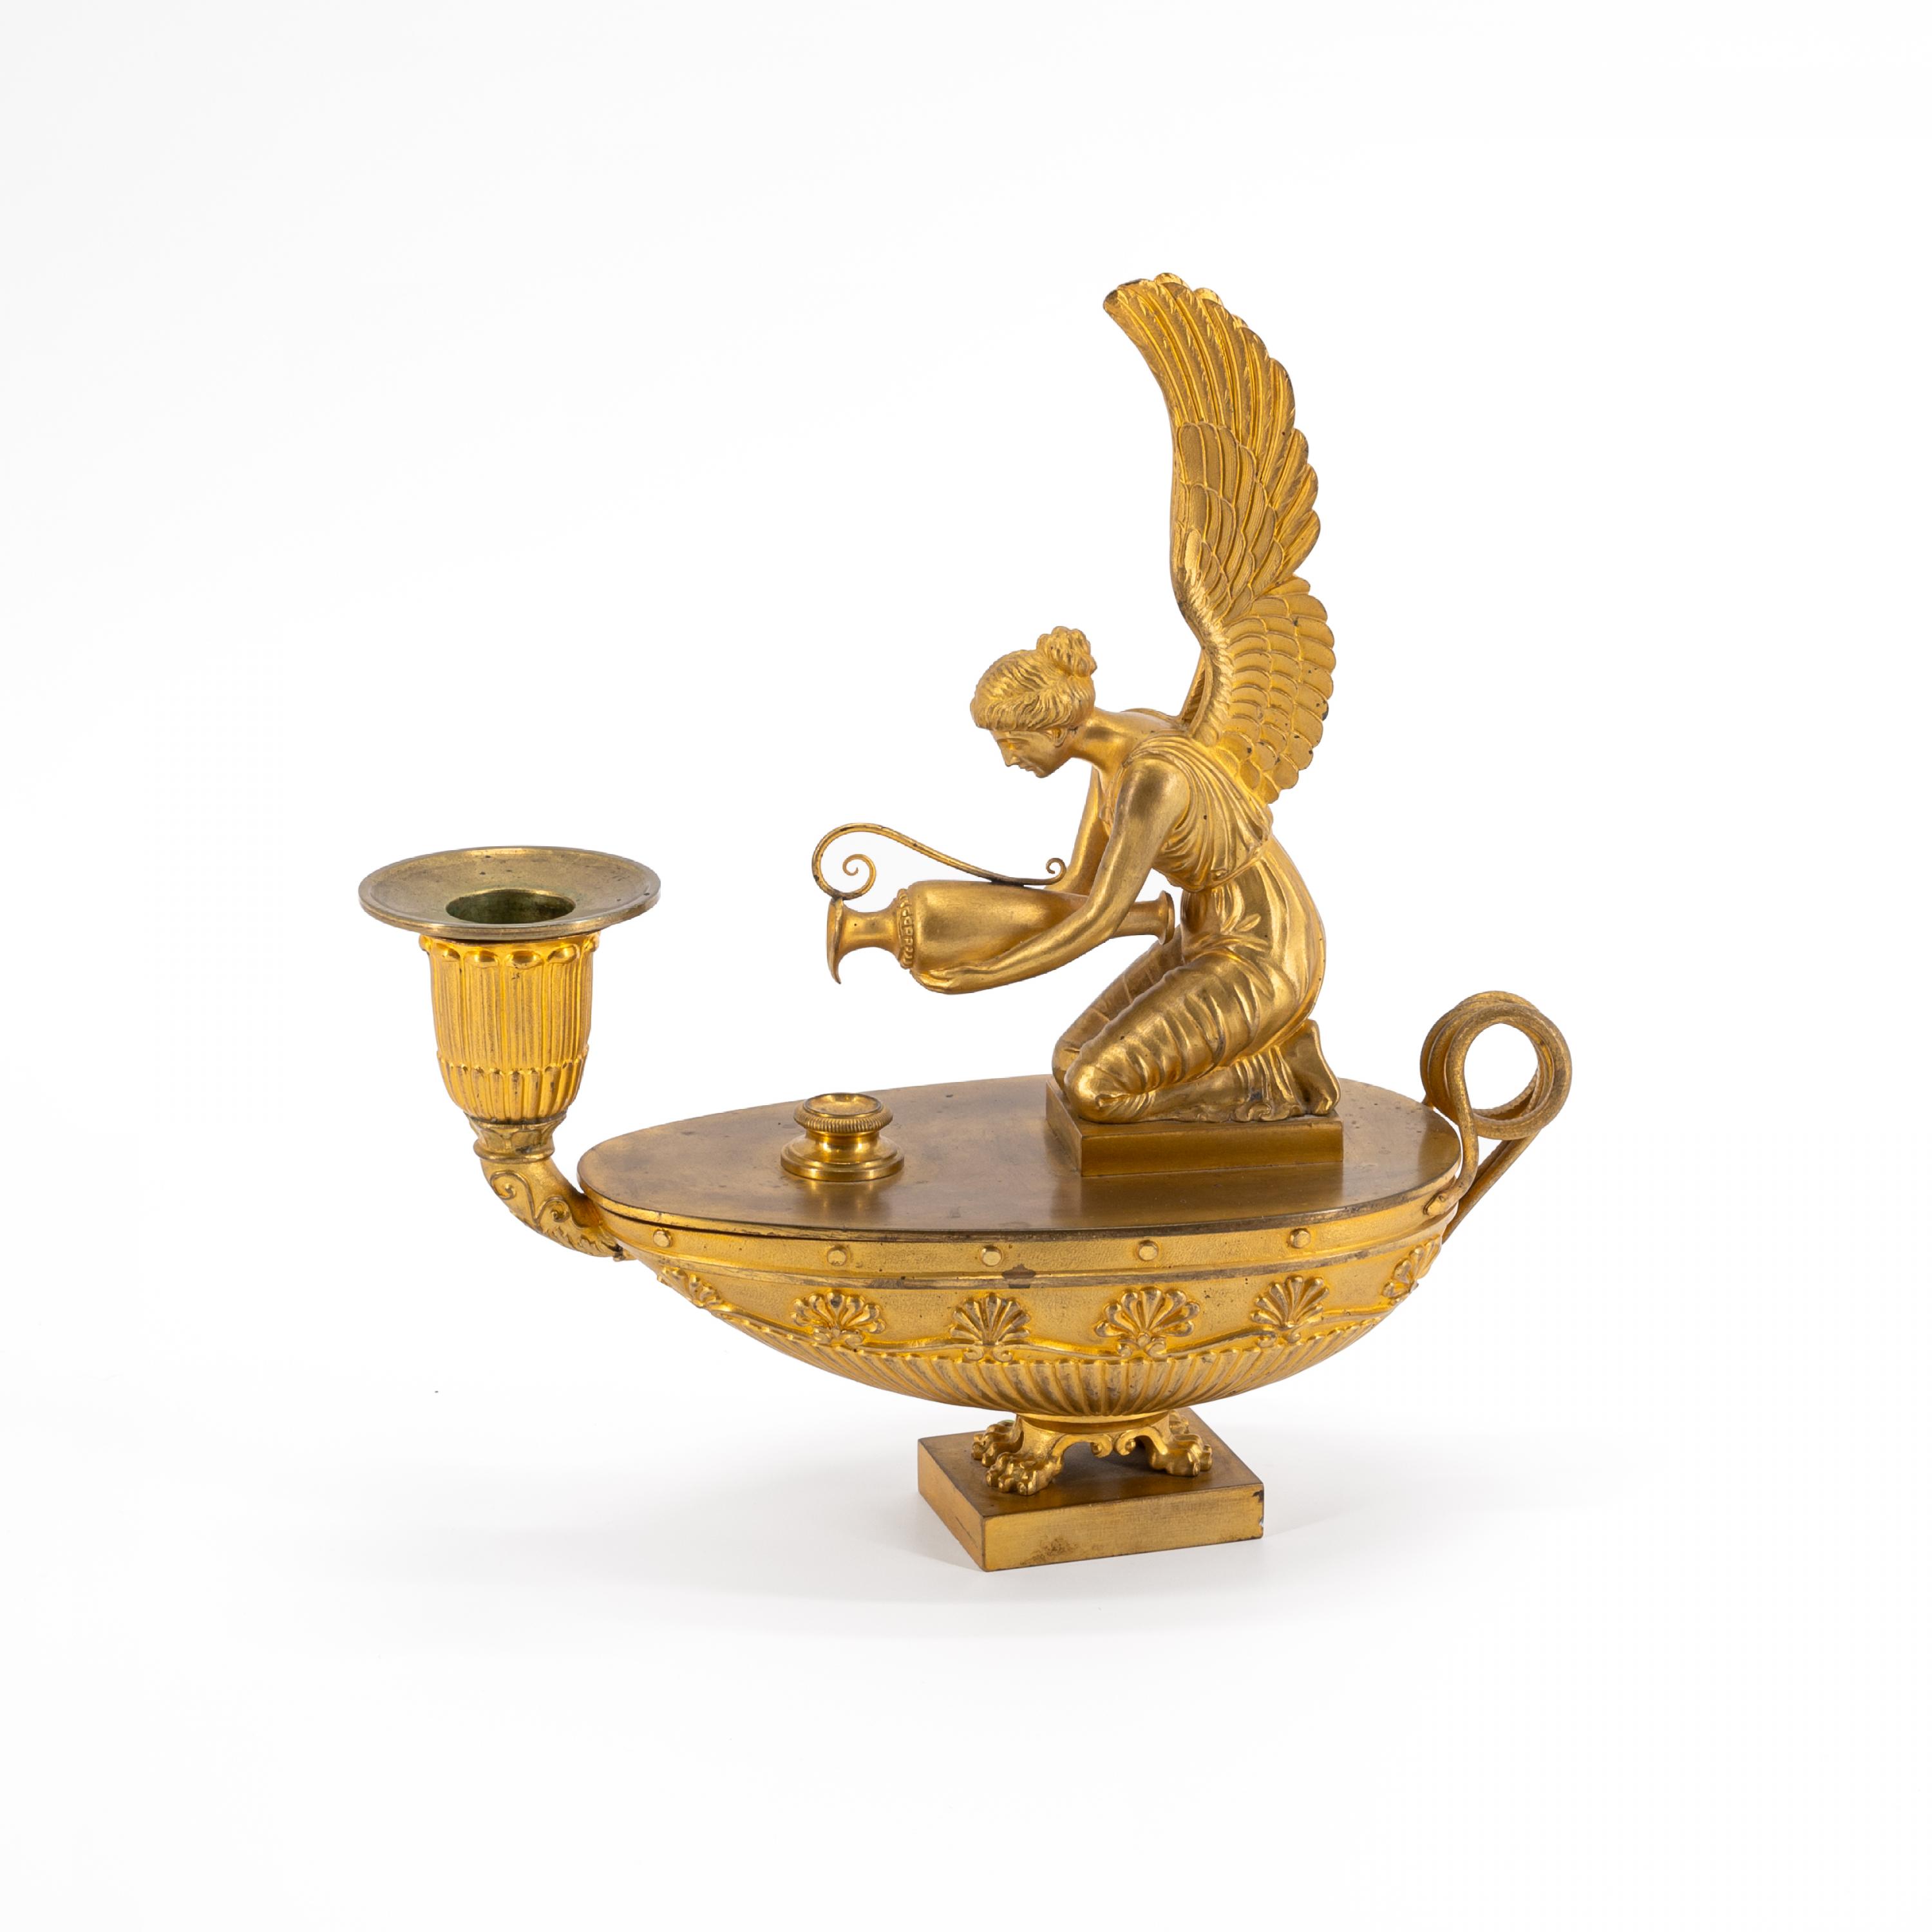 BRONZE CANDLESTICK IN THE FORM OF AN OIL LAMP EMPIRE - Image 2 of 7